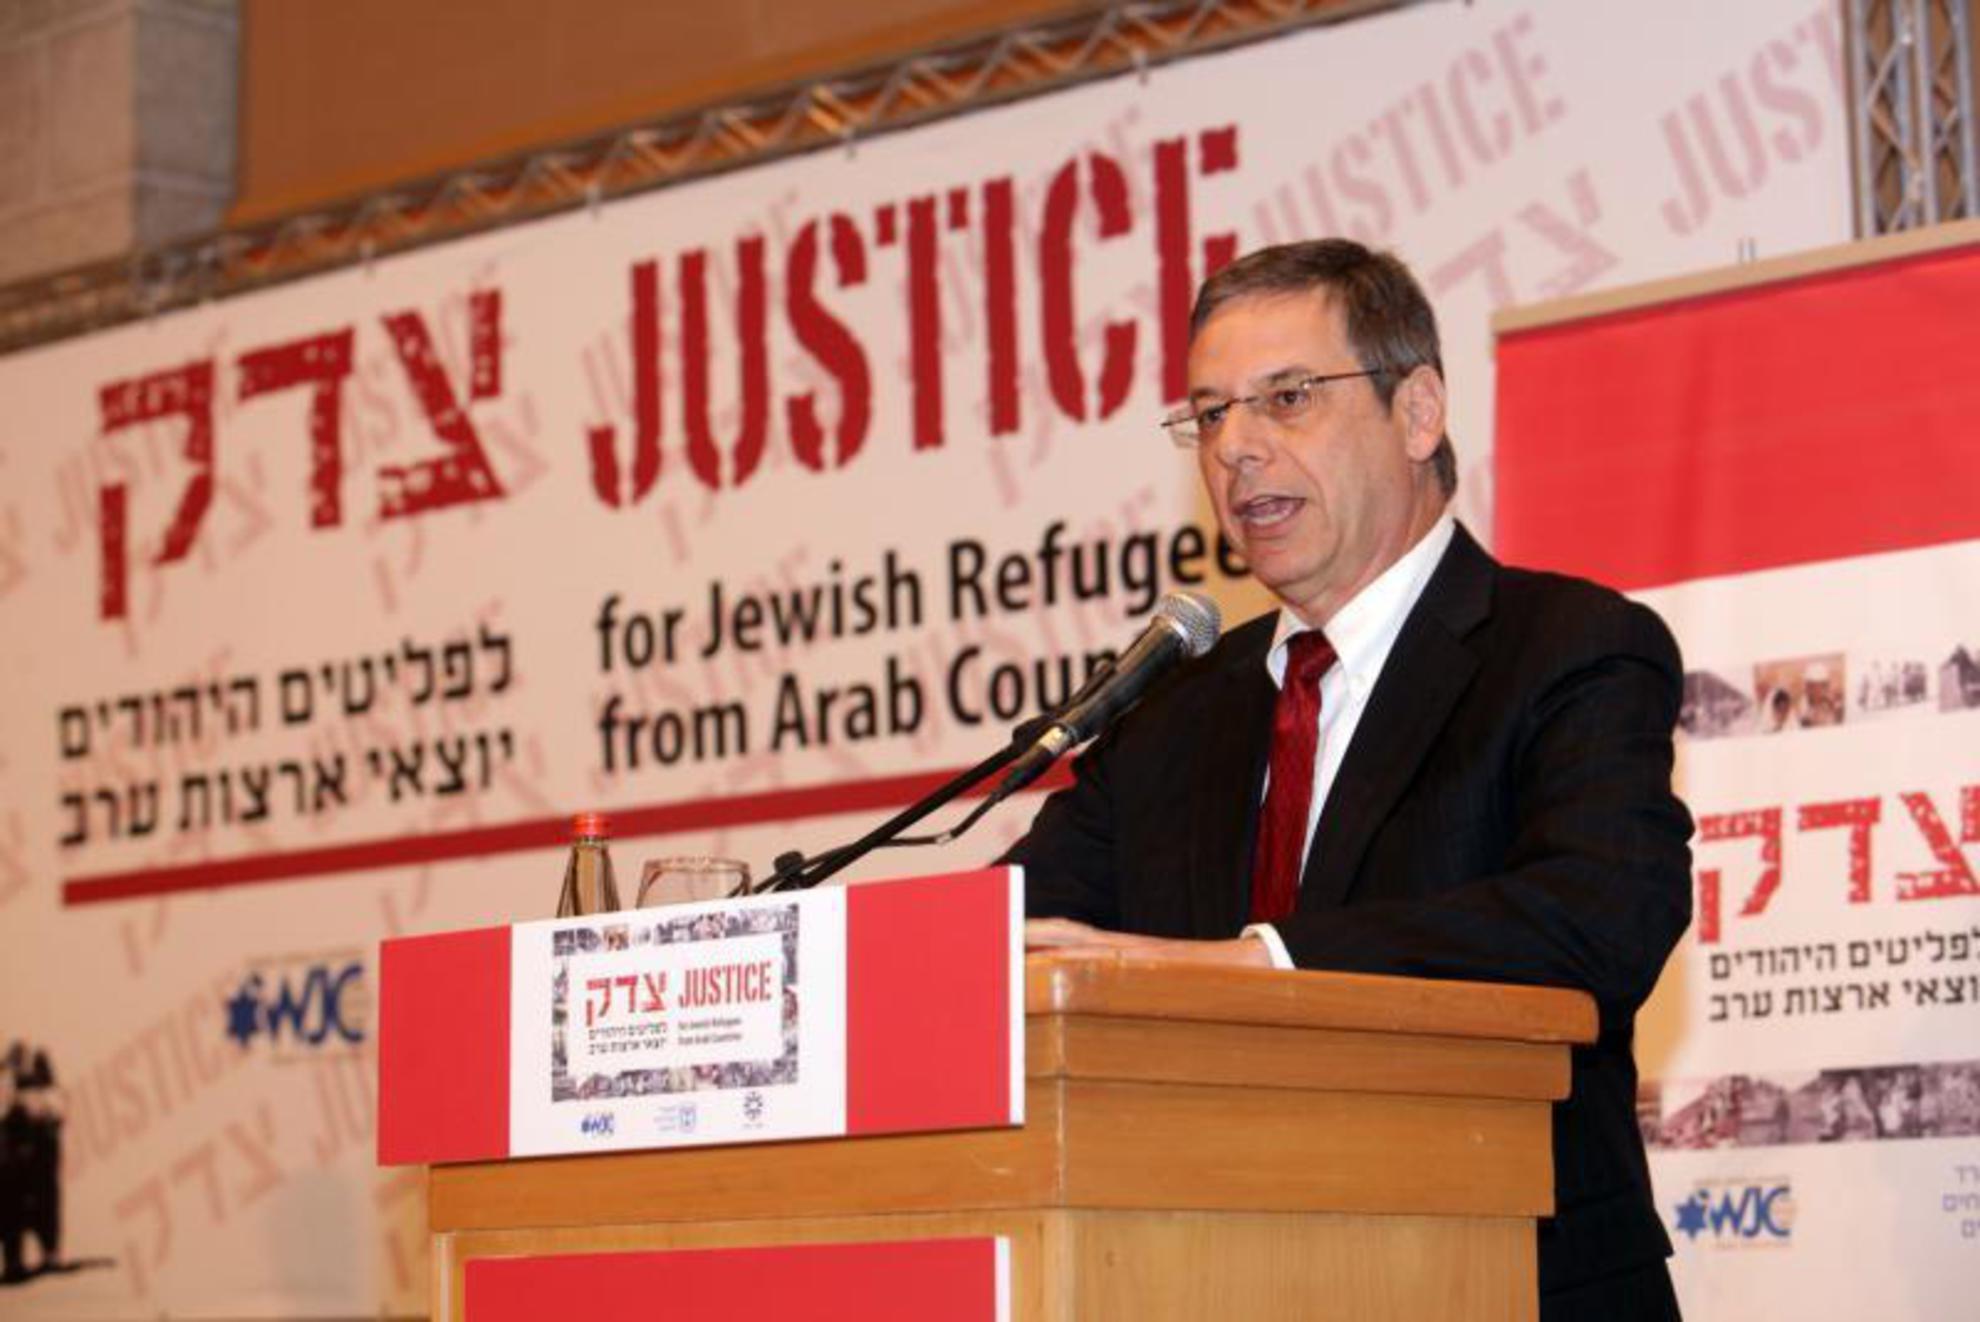 Justice for Jewish Refugees from Arab Countries